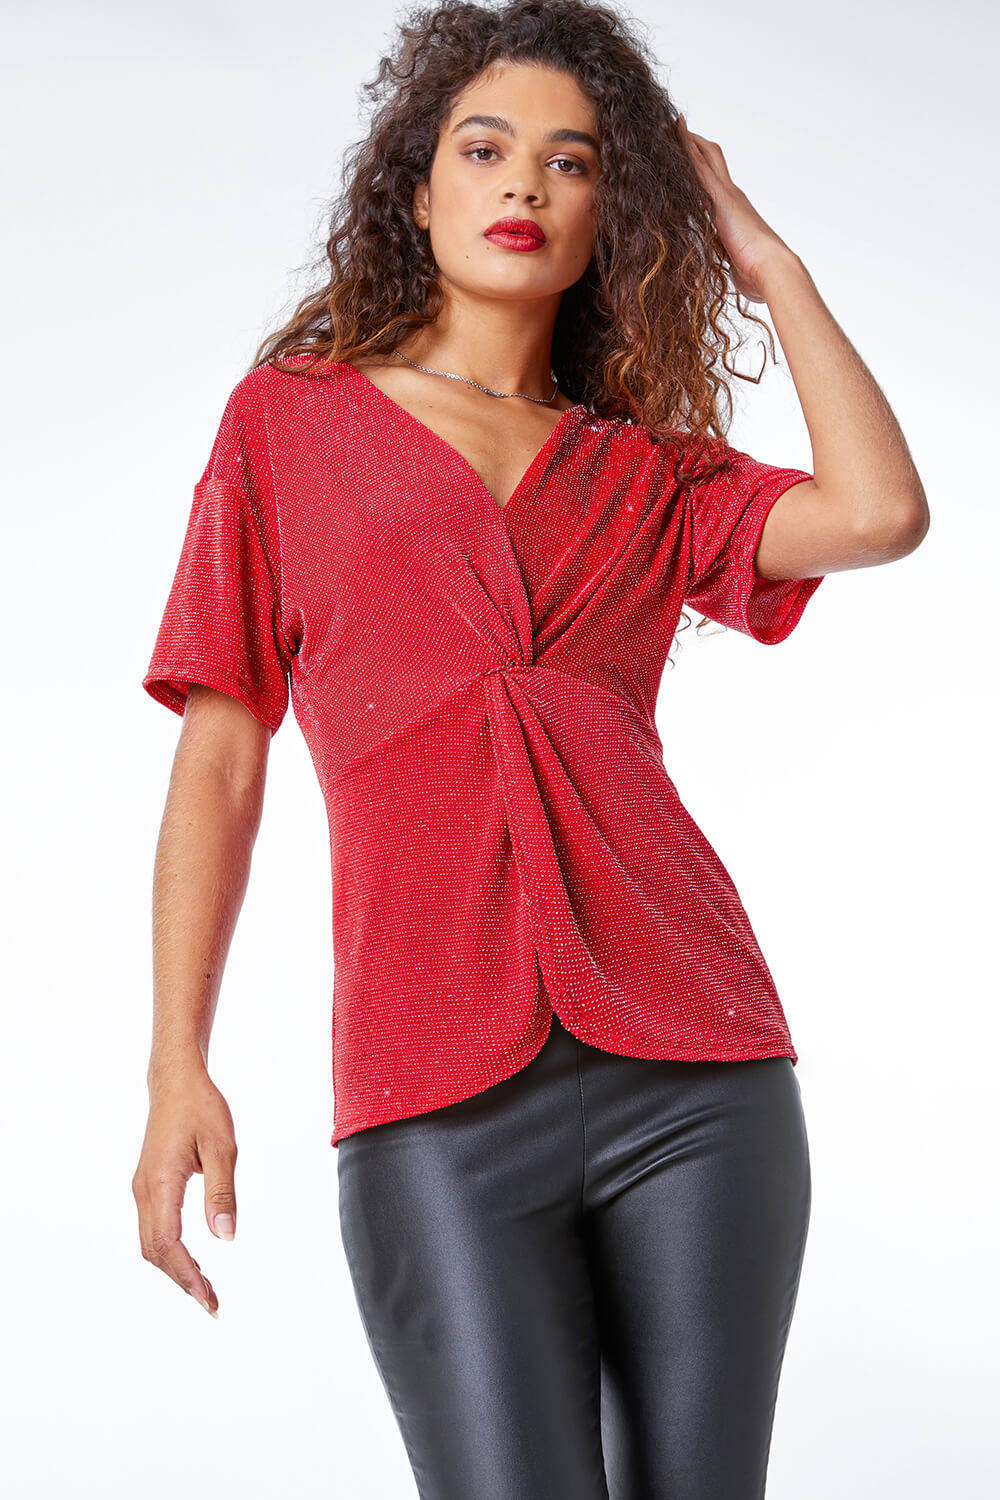 Red Twist Front Sparkle Stretch Top, Image 2 of 5